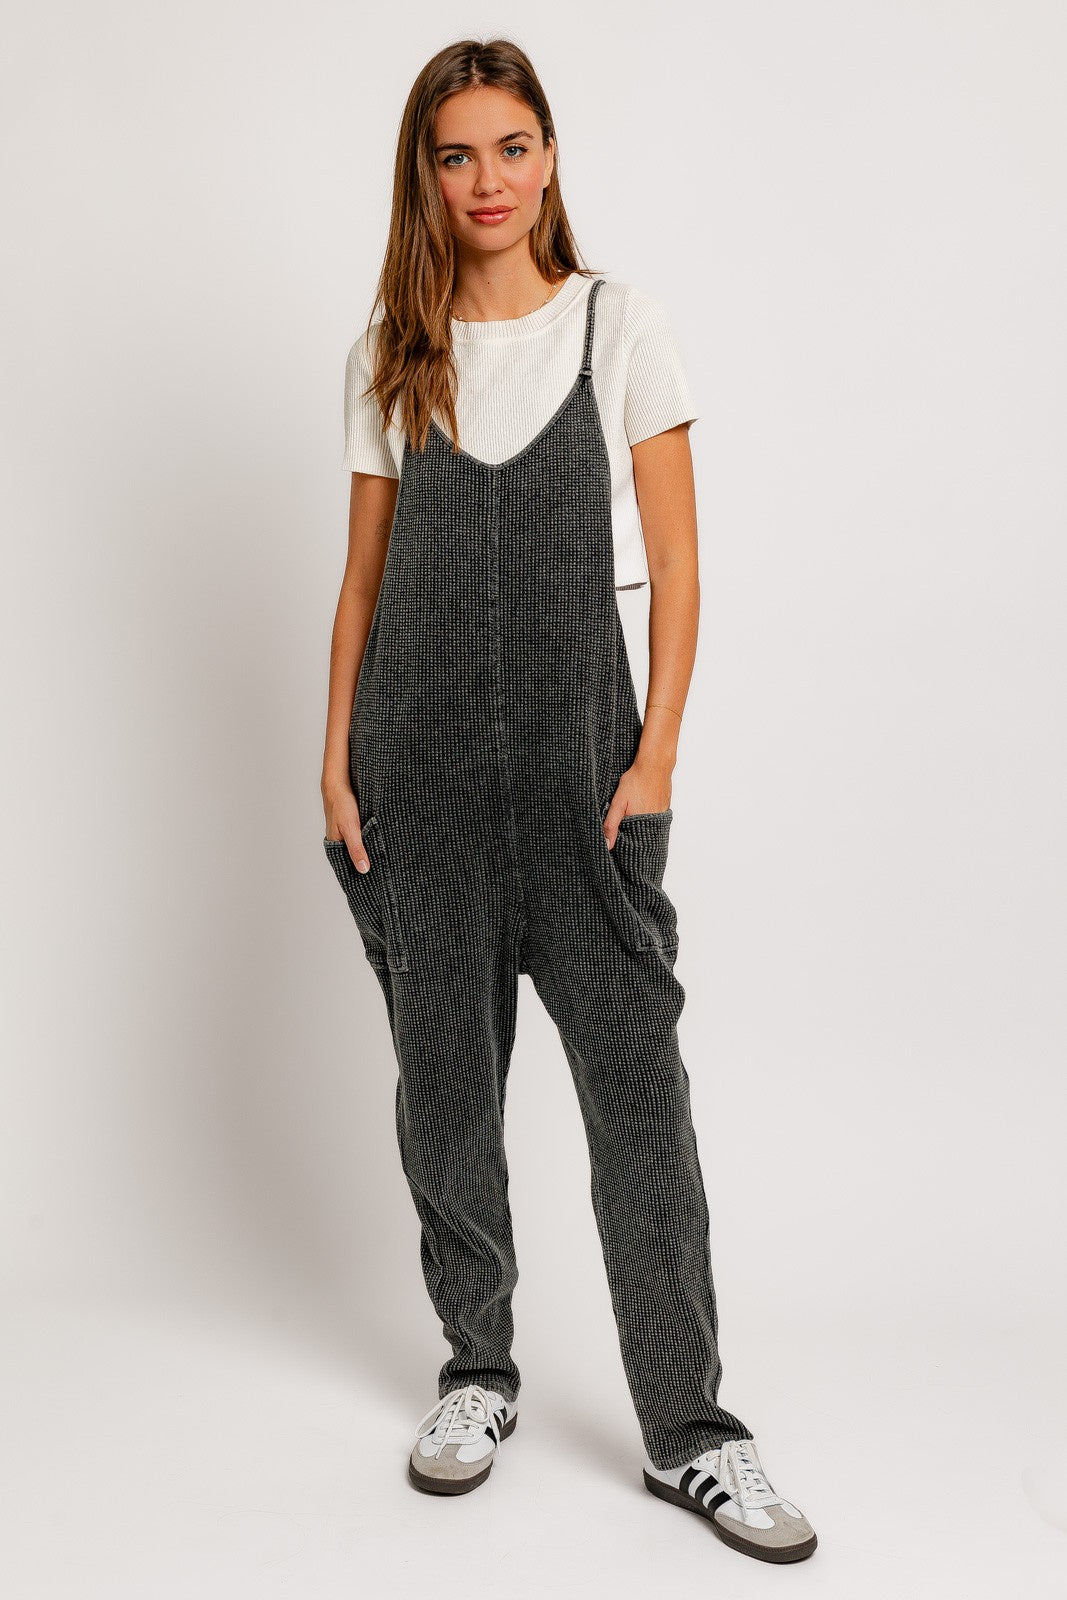 Jessey Knit Overall